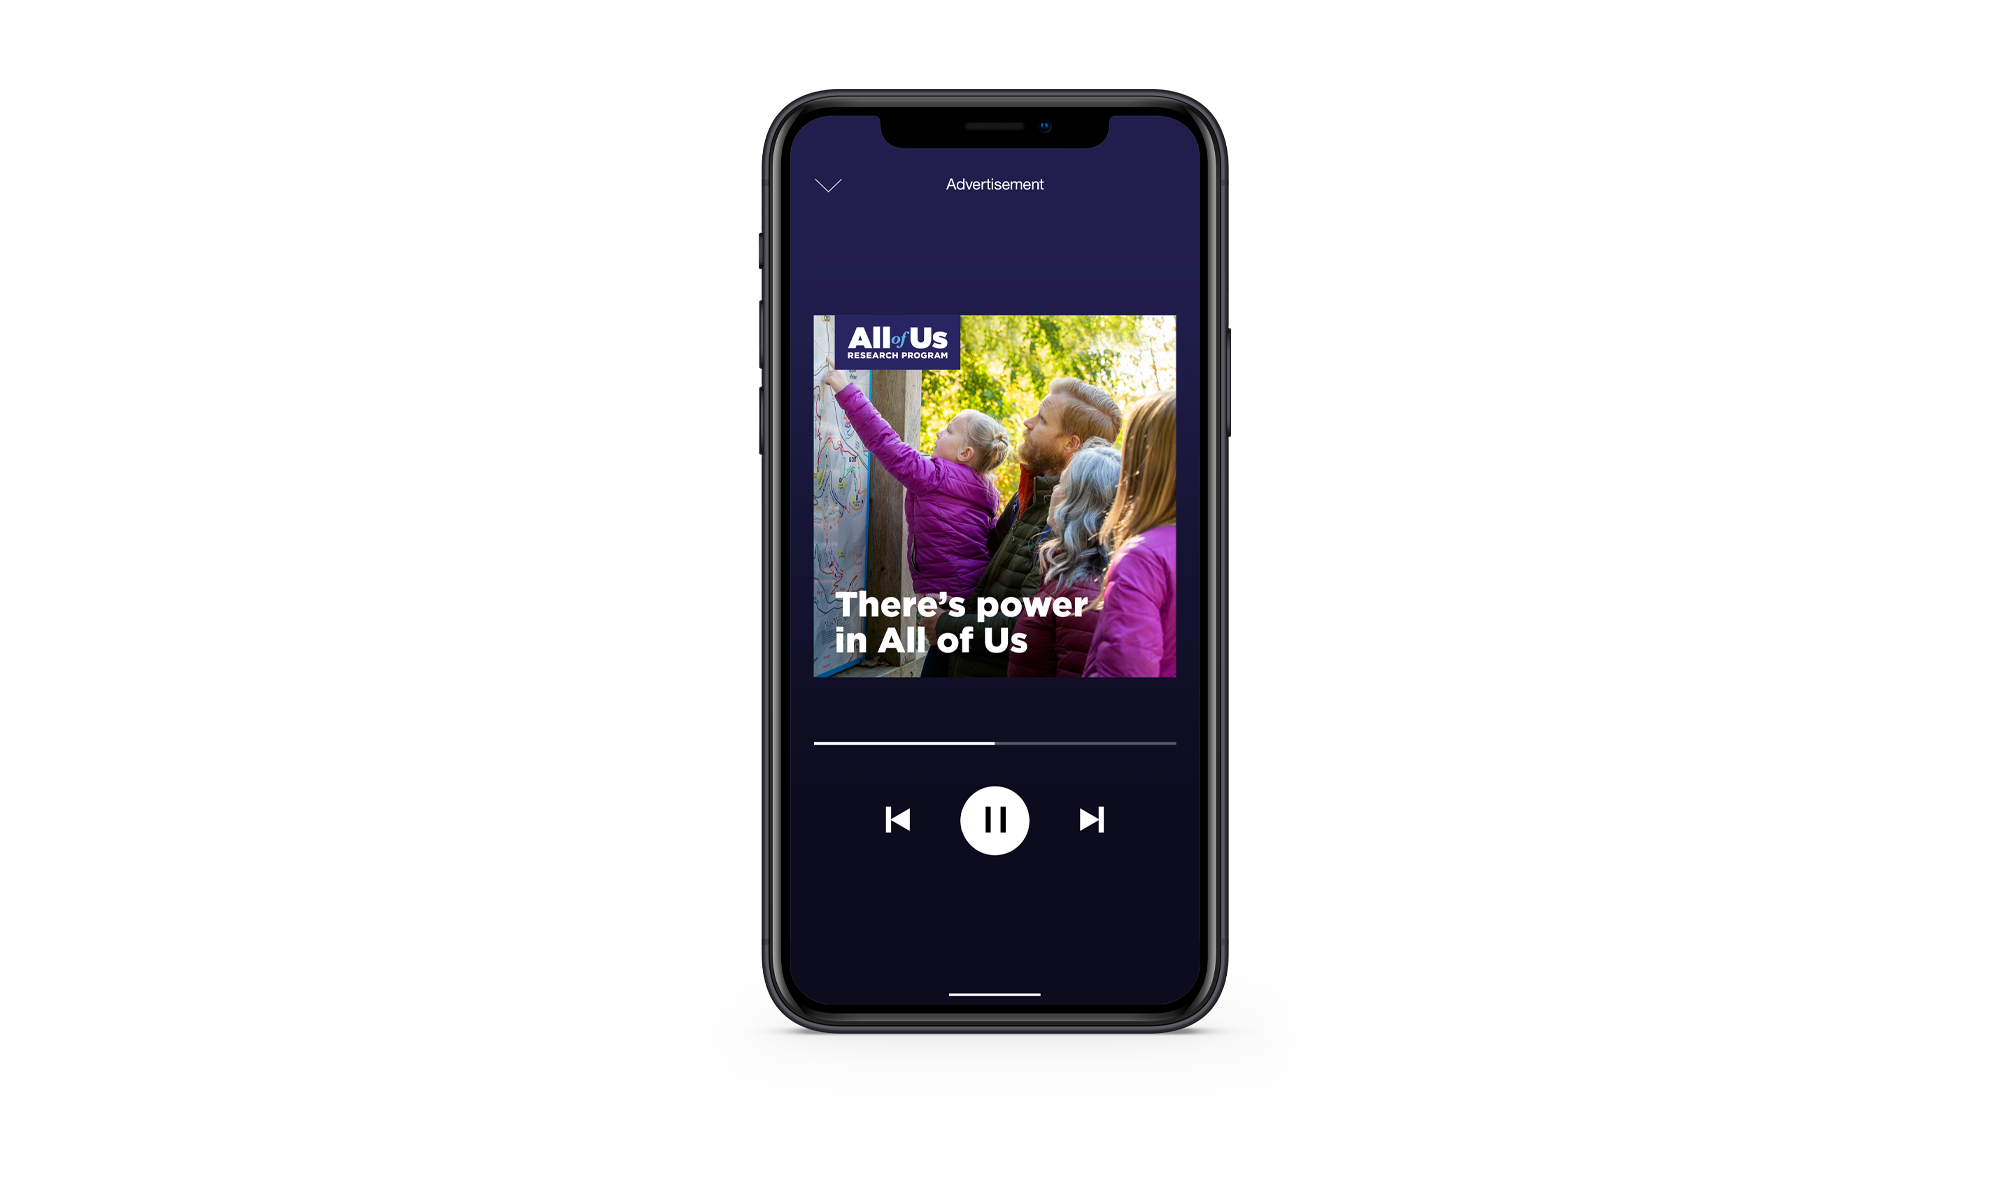 All of Us Spotify ad